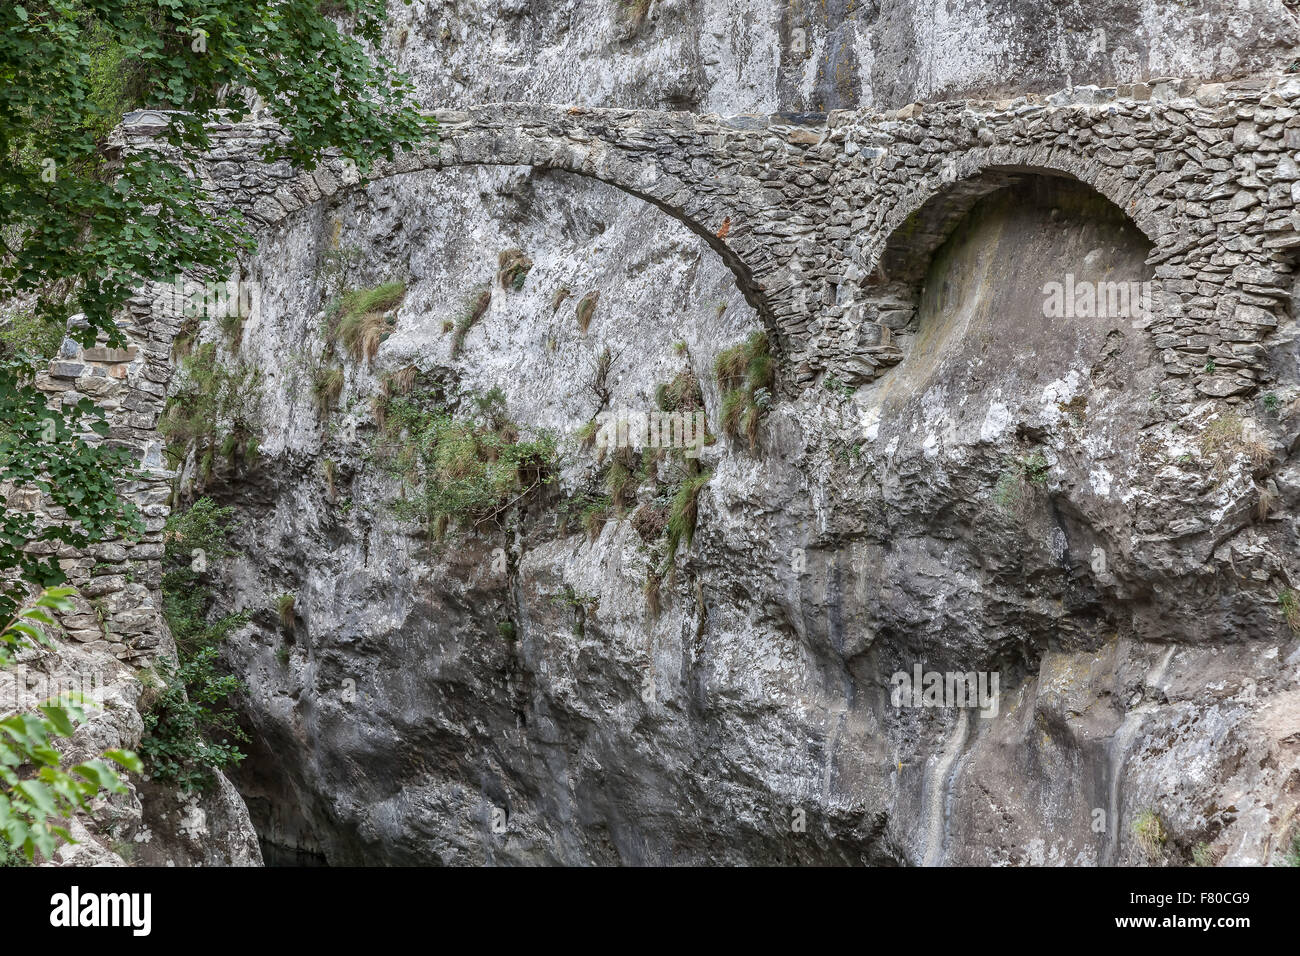 The old bridge at Saorge. Saorge is a very beautiful medieval town in Alpes-Maritimes department in southeastern France. Stock Photo